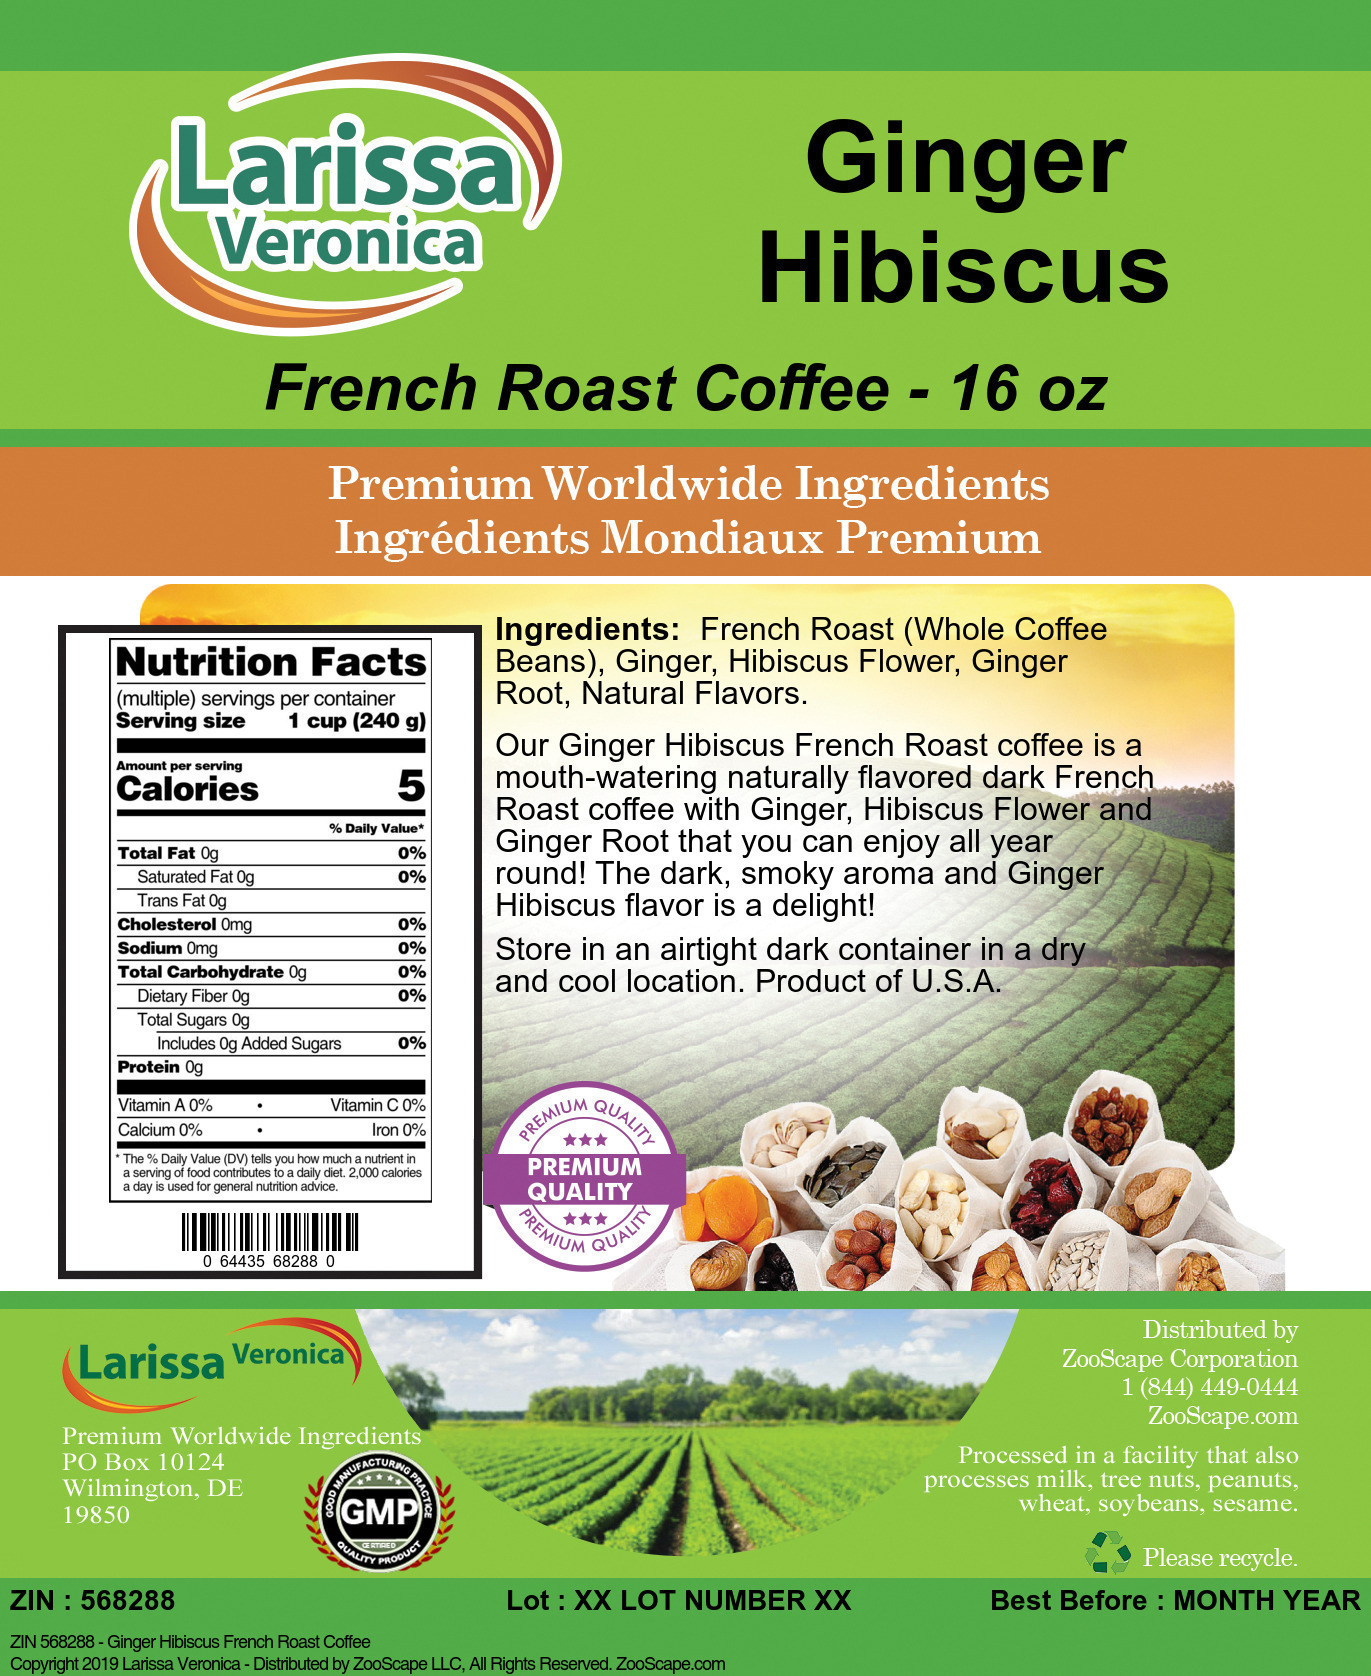 Ginger Hibiscus French Roast Coffee - Label